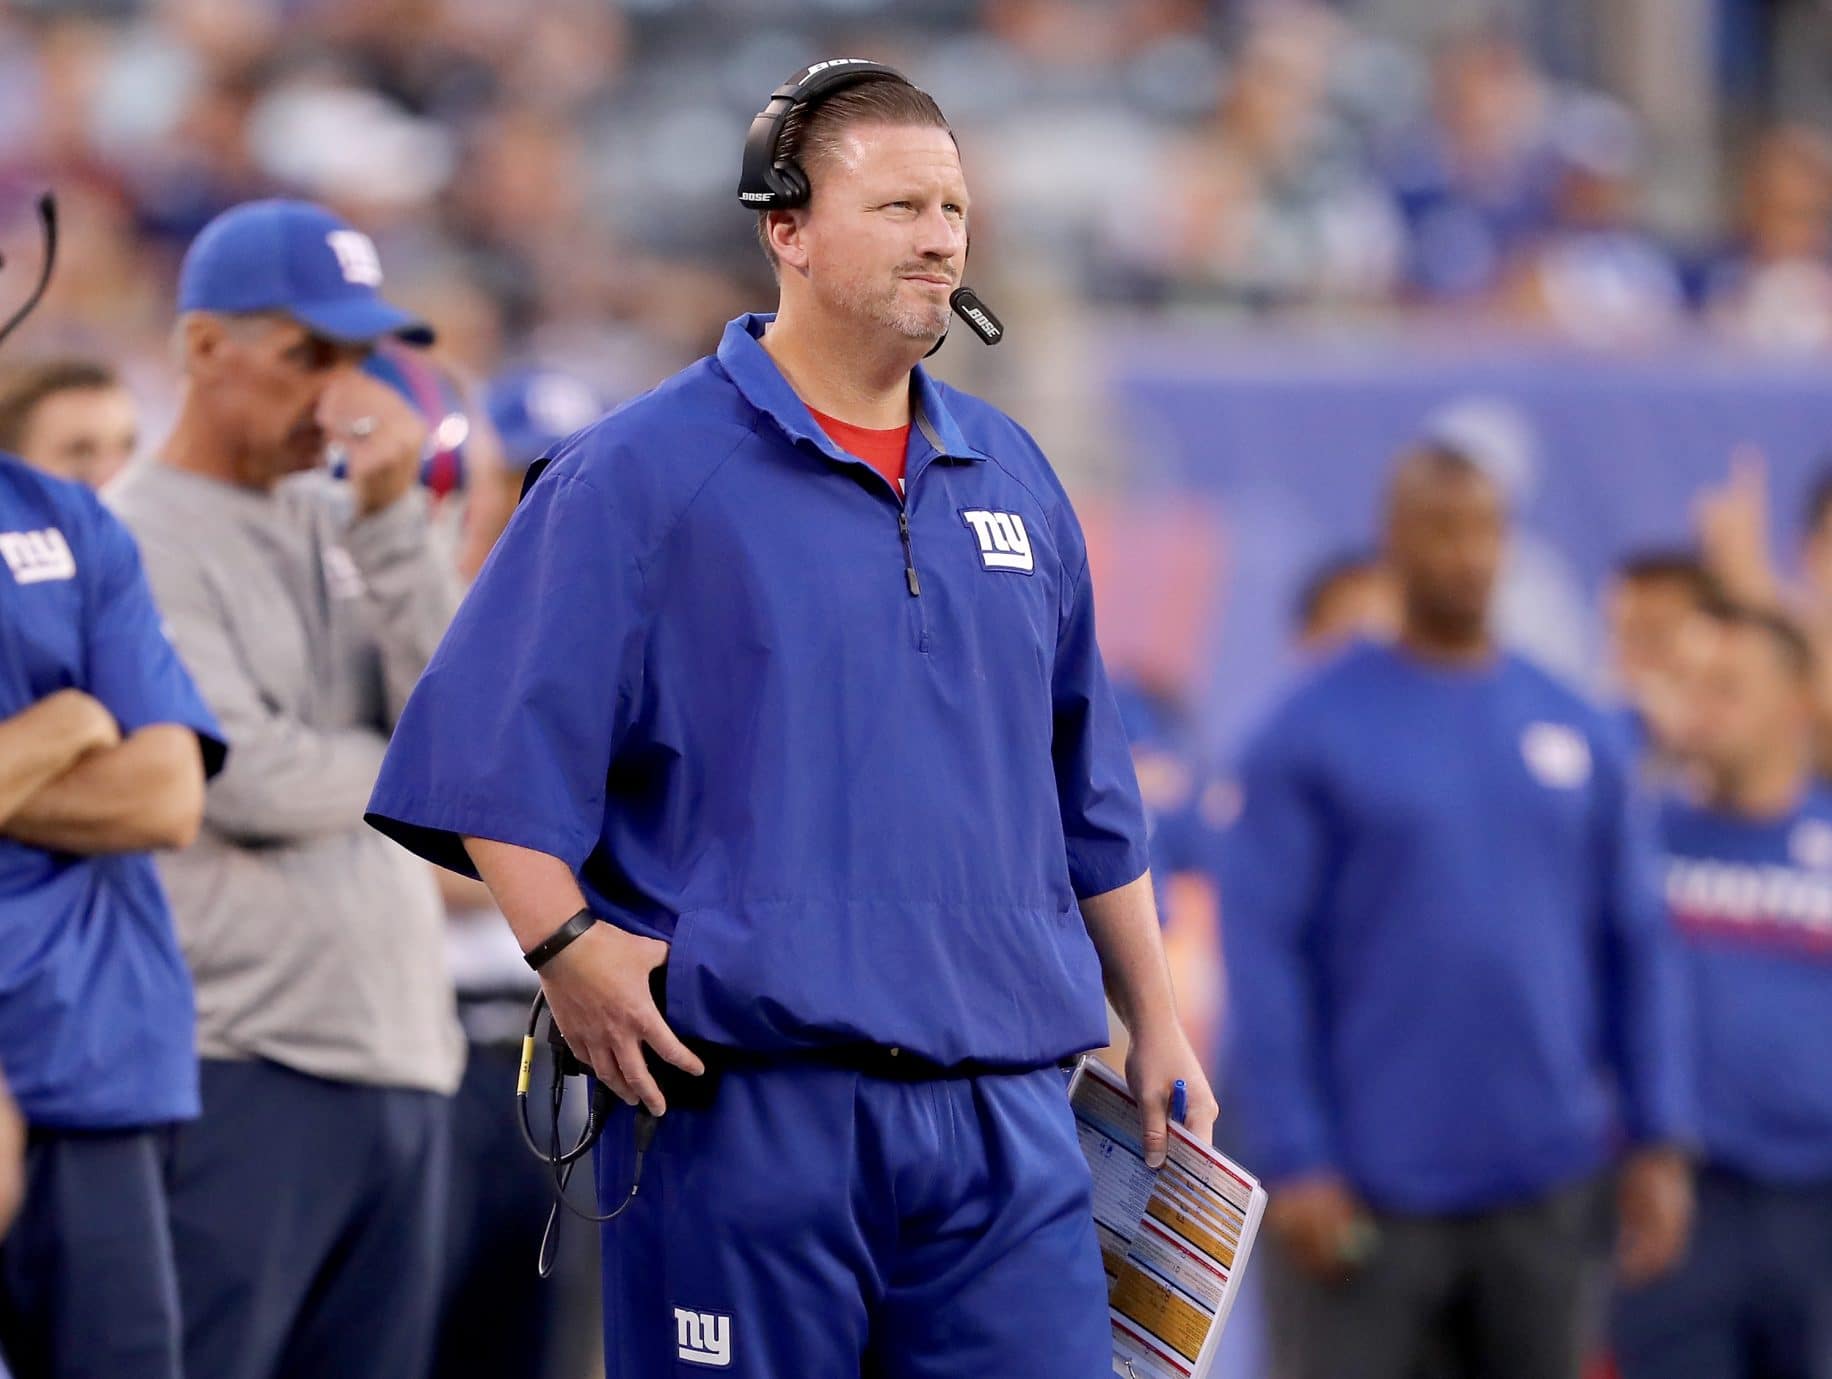 Giants' Ben McAdoo Calls Out 'Fake News' In Unusual Friday Presser 